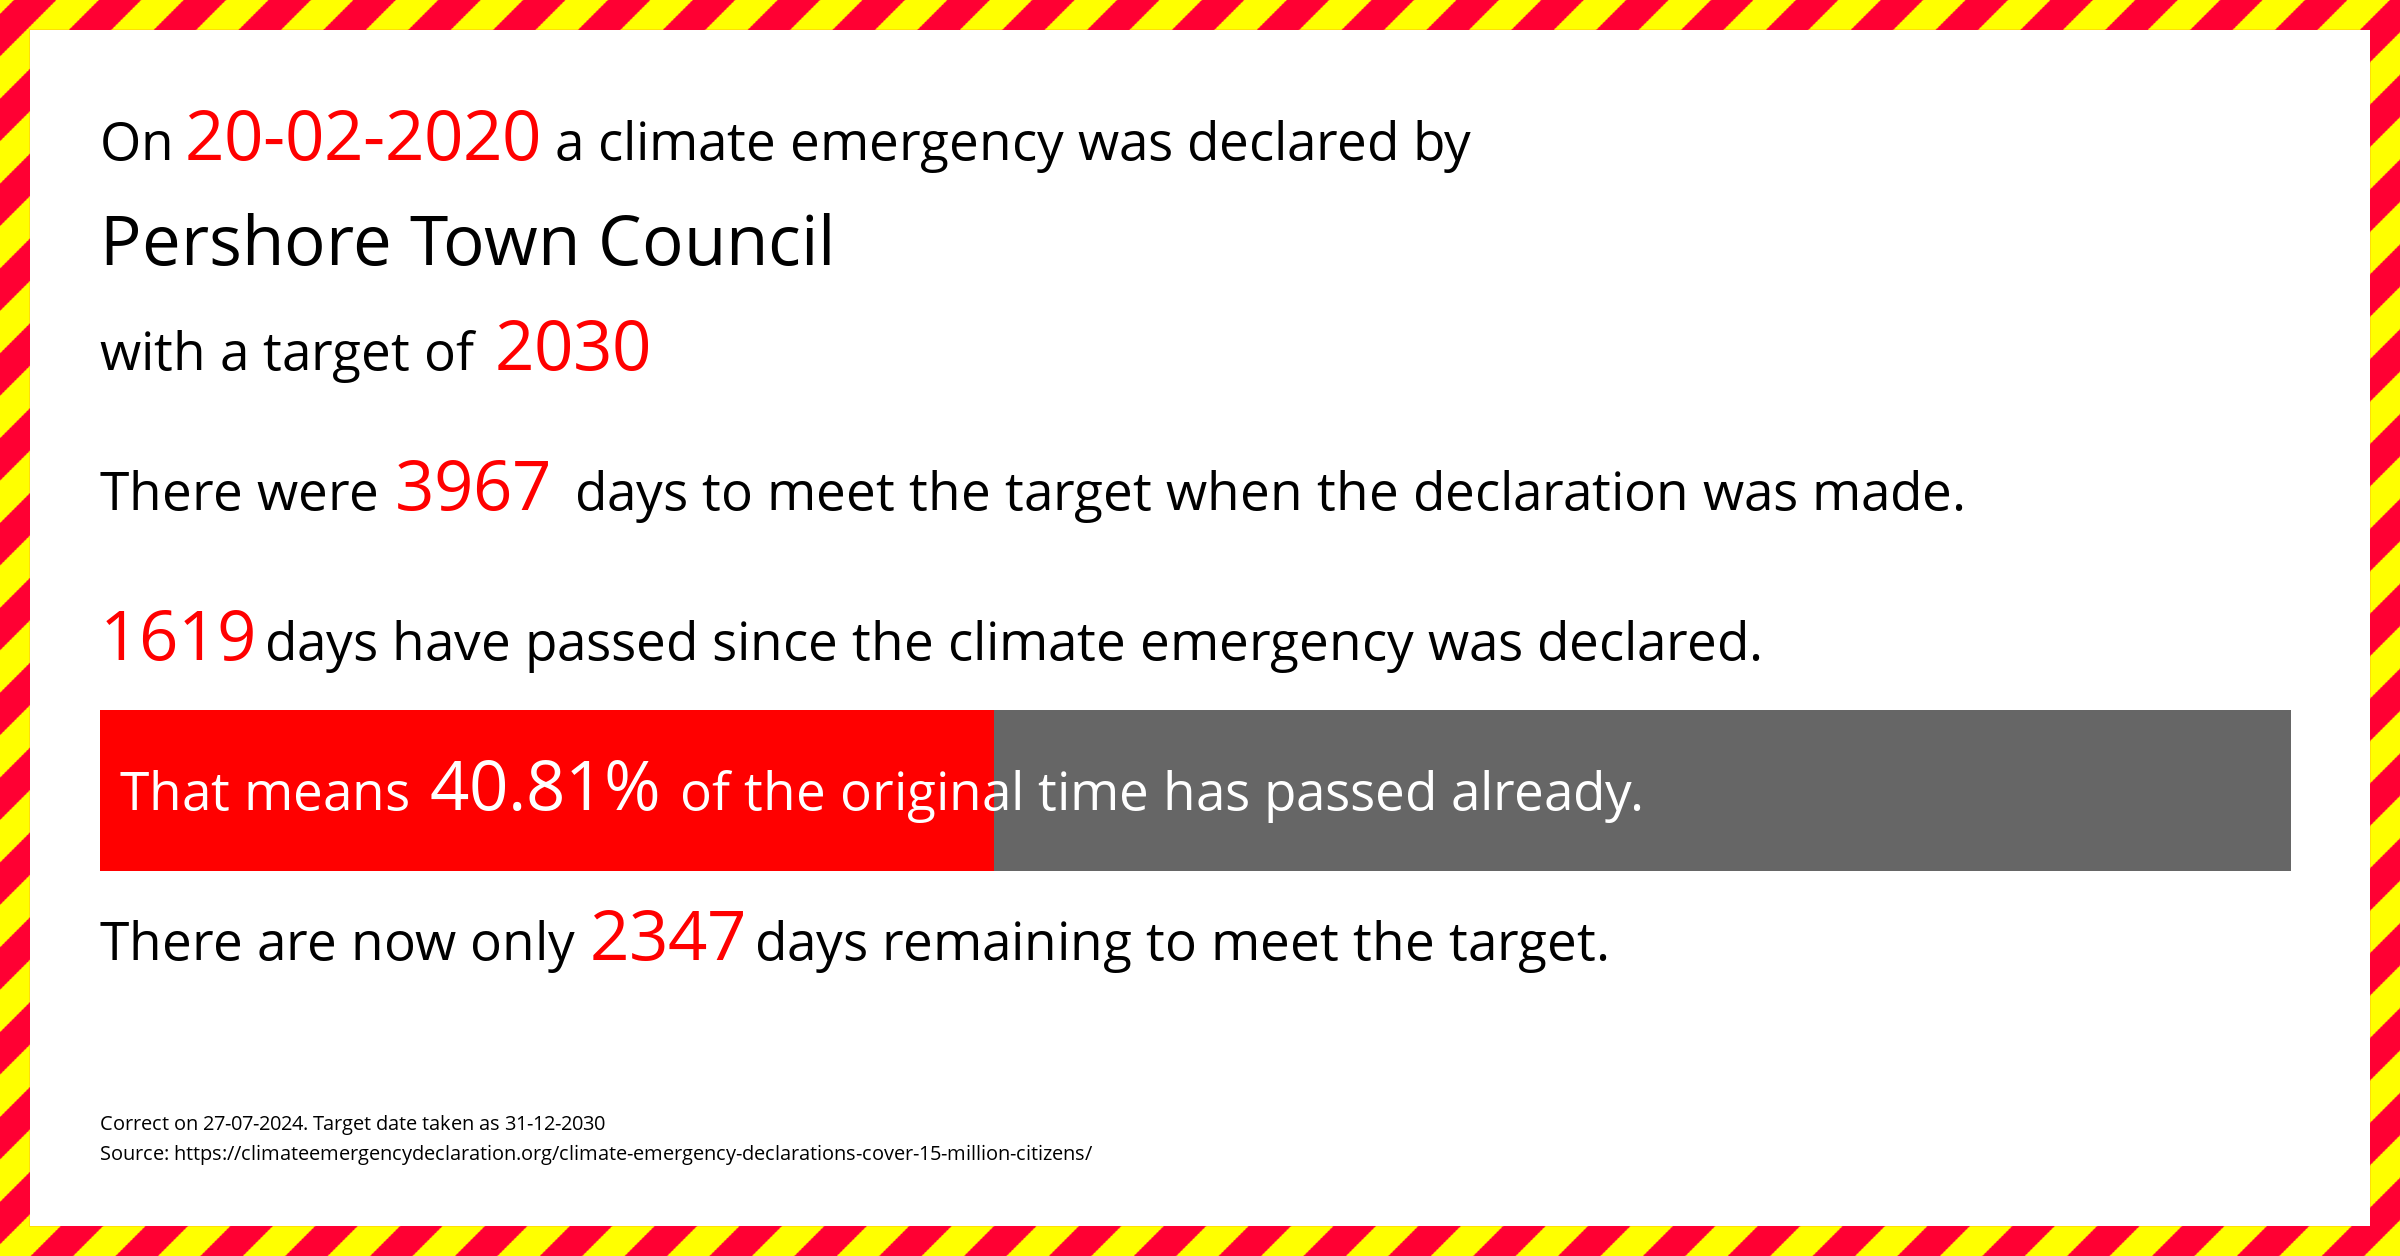 Pershore Town Council  declared a Climate emergency on Thursday 20th February 2020, with a target of 2030.